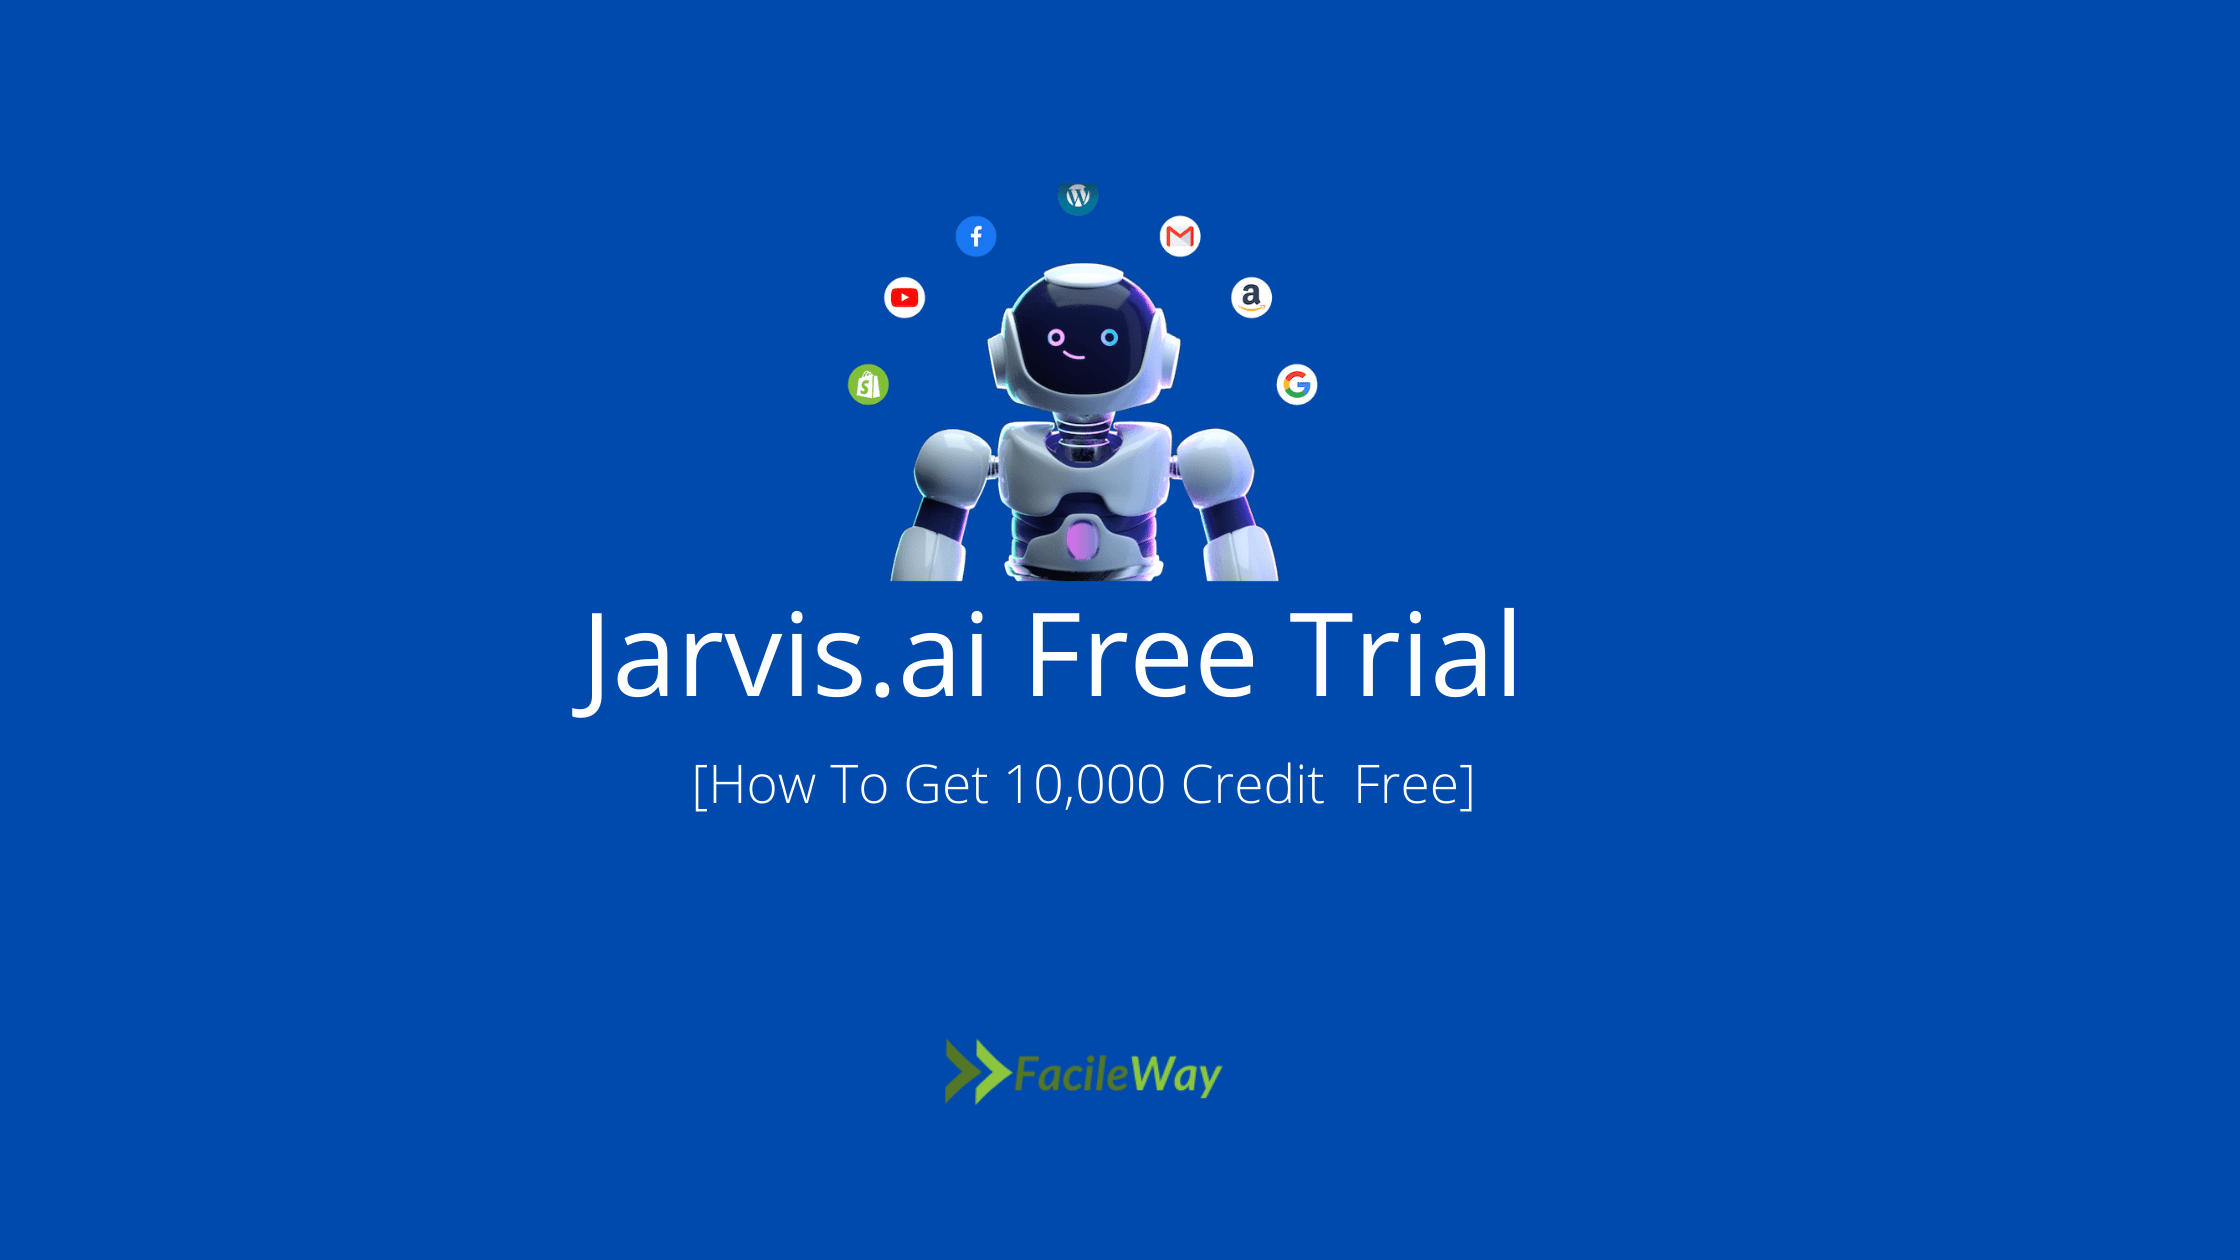 Jarvis.ai Free Trial